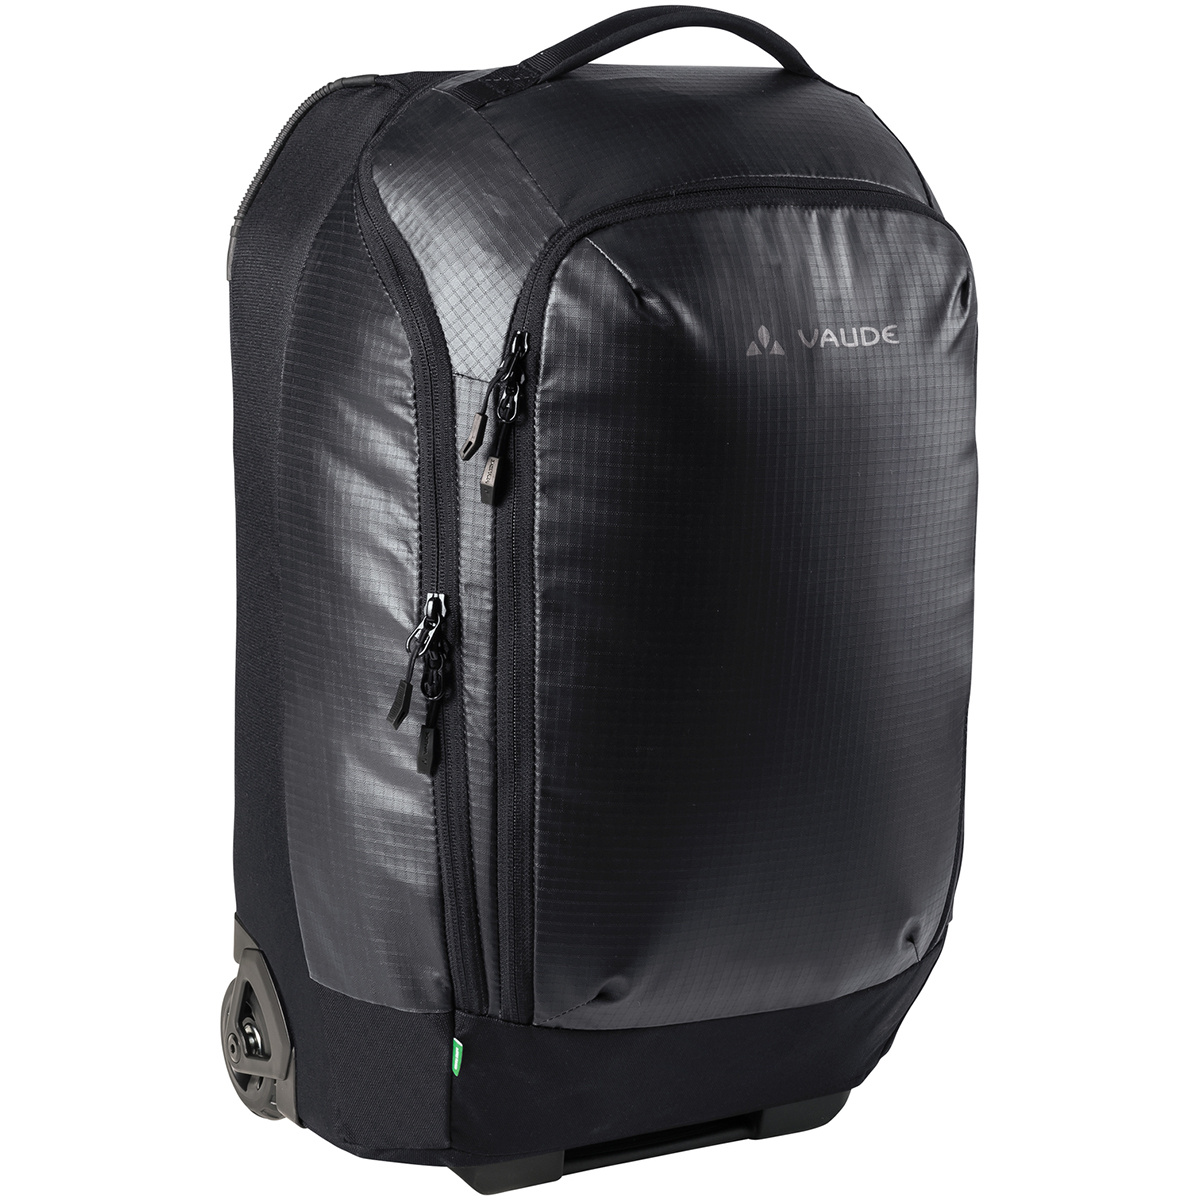 Image of Vaude Trolley Citytravel Carry-on